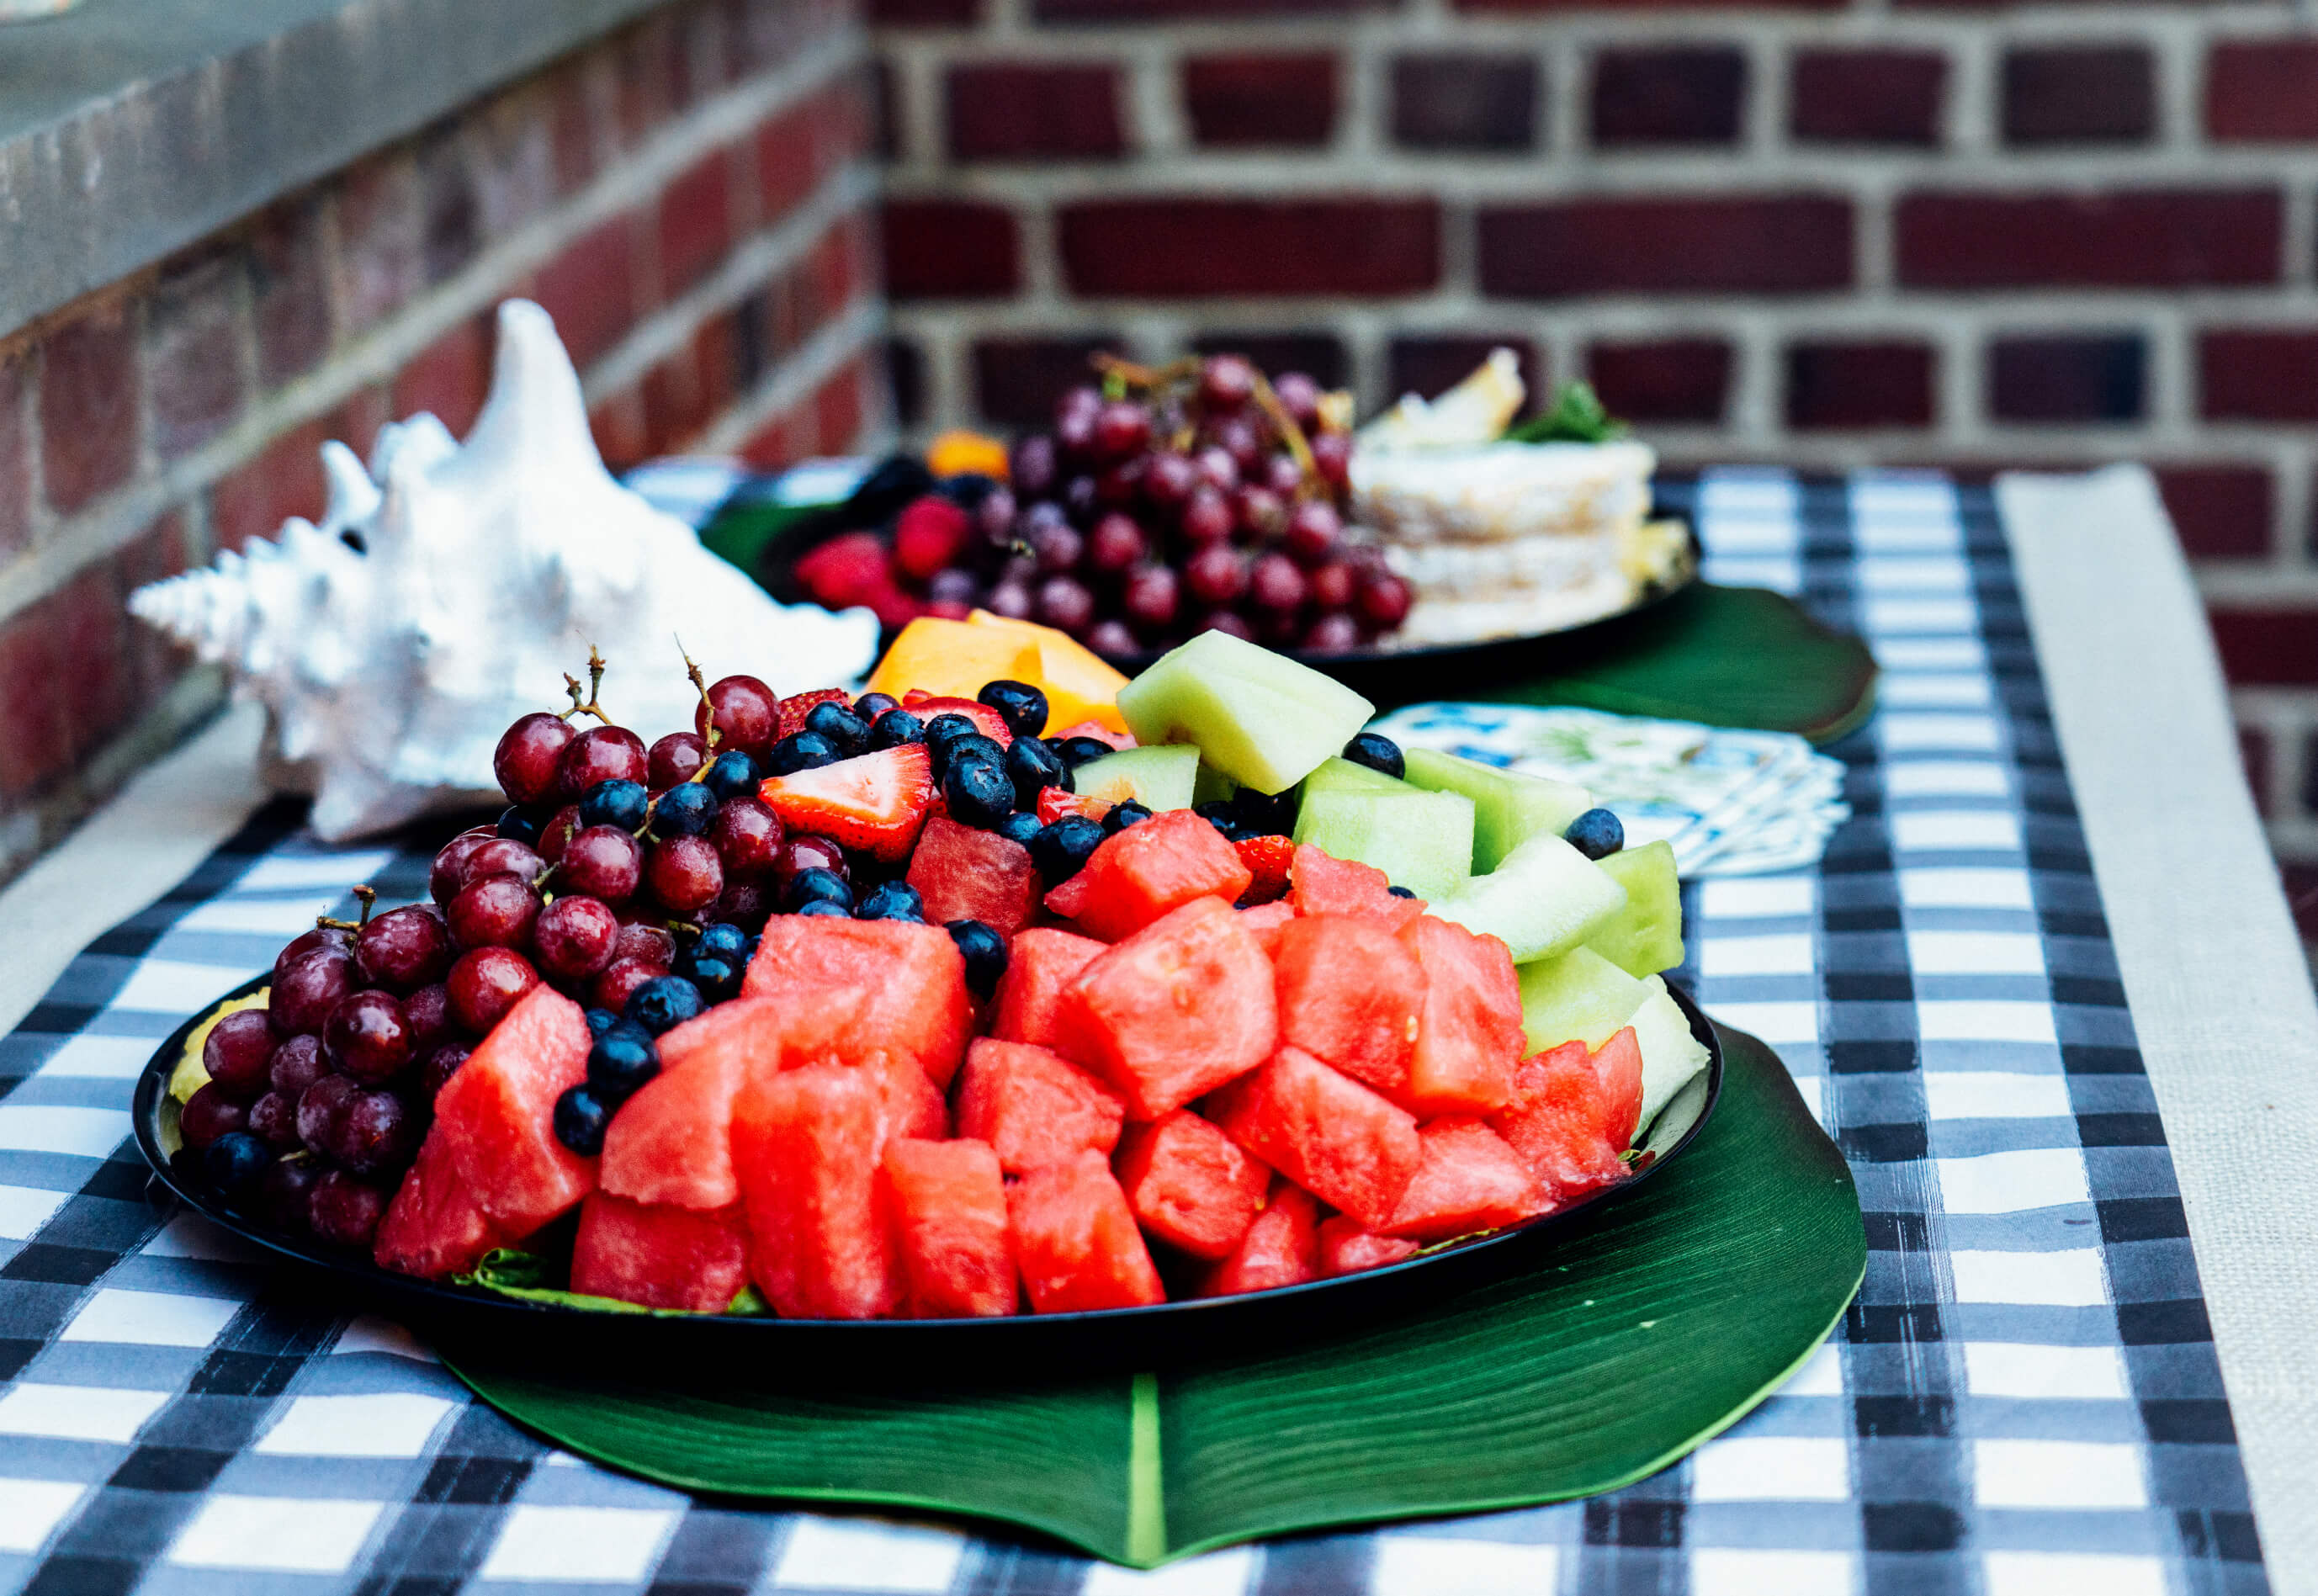 Outdoor Patio Redesign, Modern, Assorted Catered Plates, Fruit Plate, Banana Leaf Placemat, Sickles Market, Tilden of To Be Bright